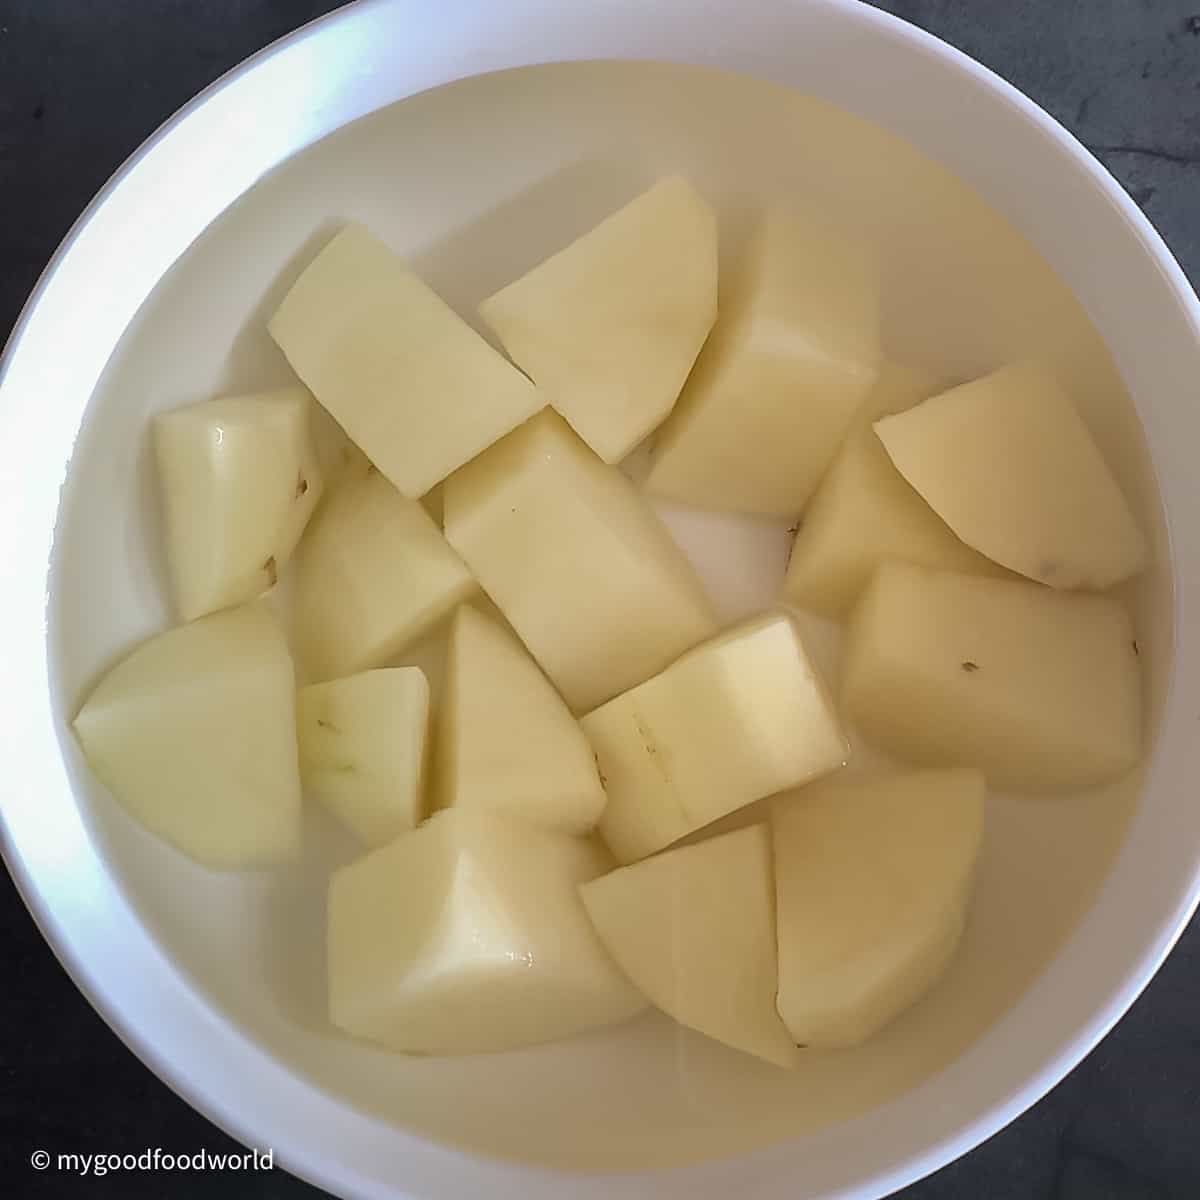 Diced potato soaking in water in a round white bowl.